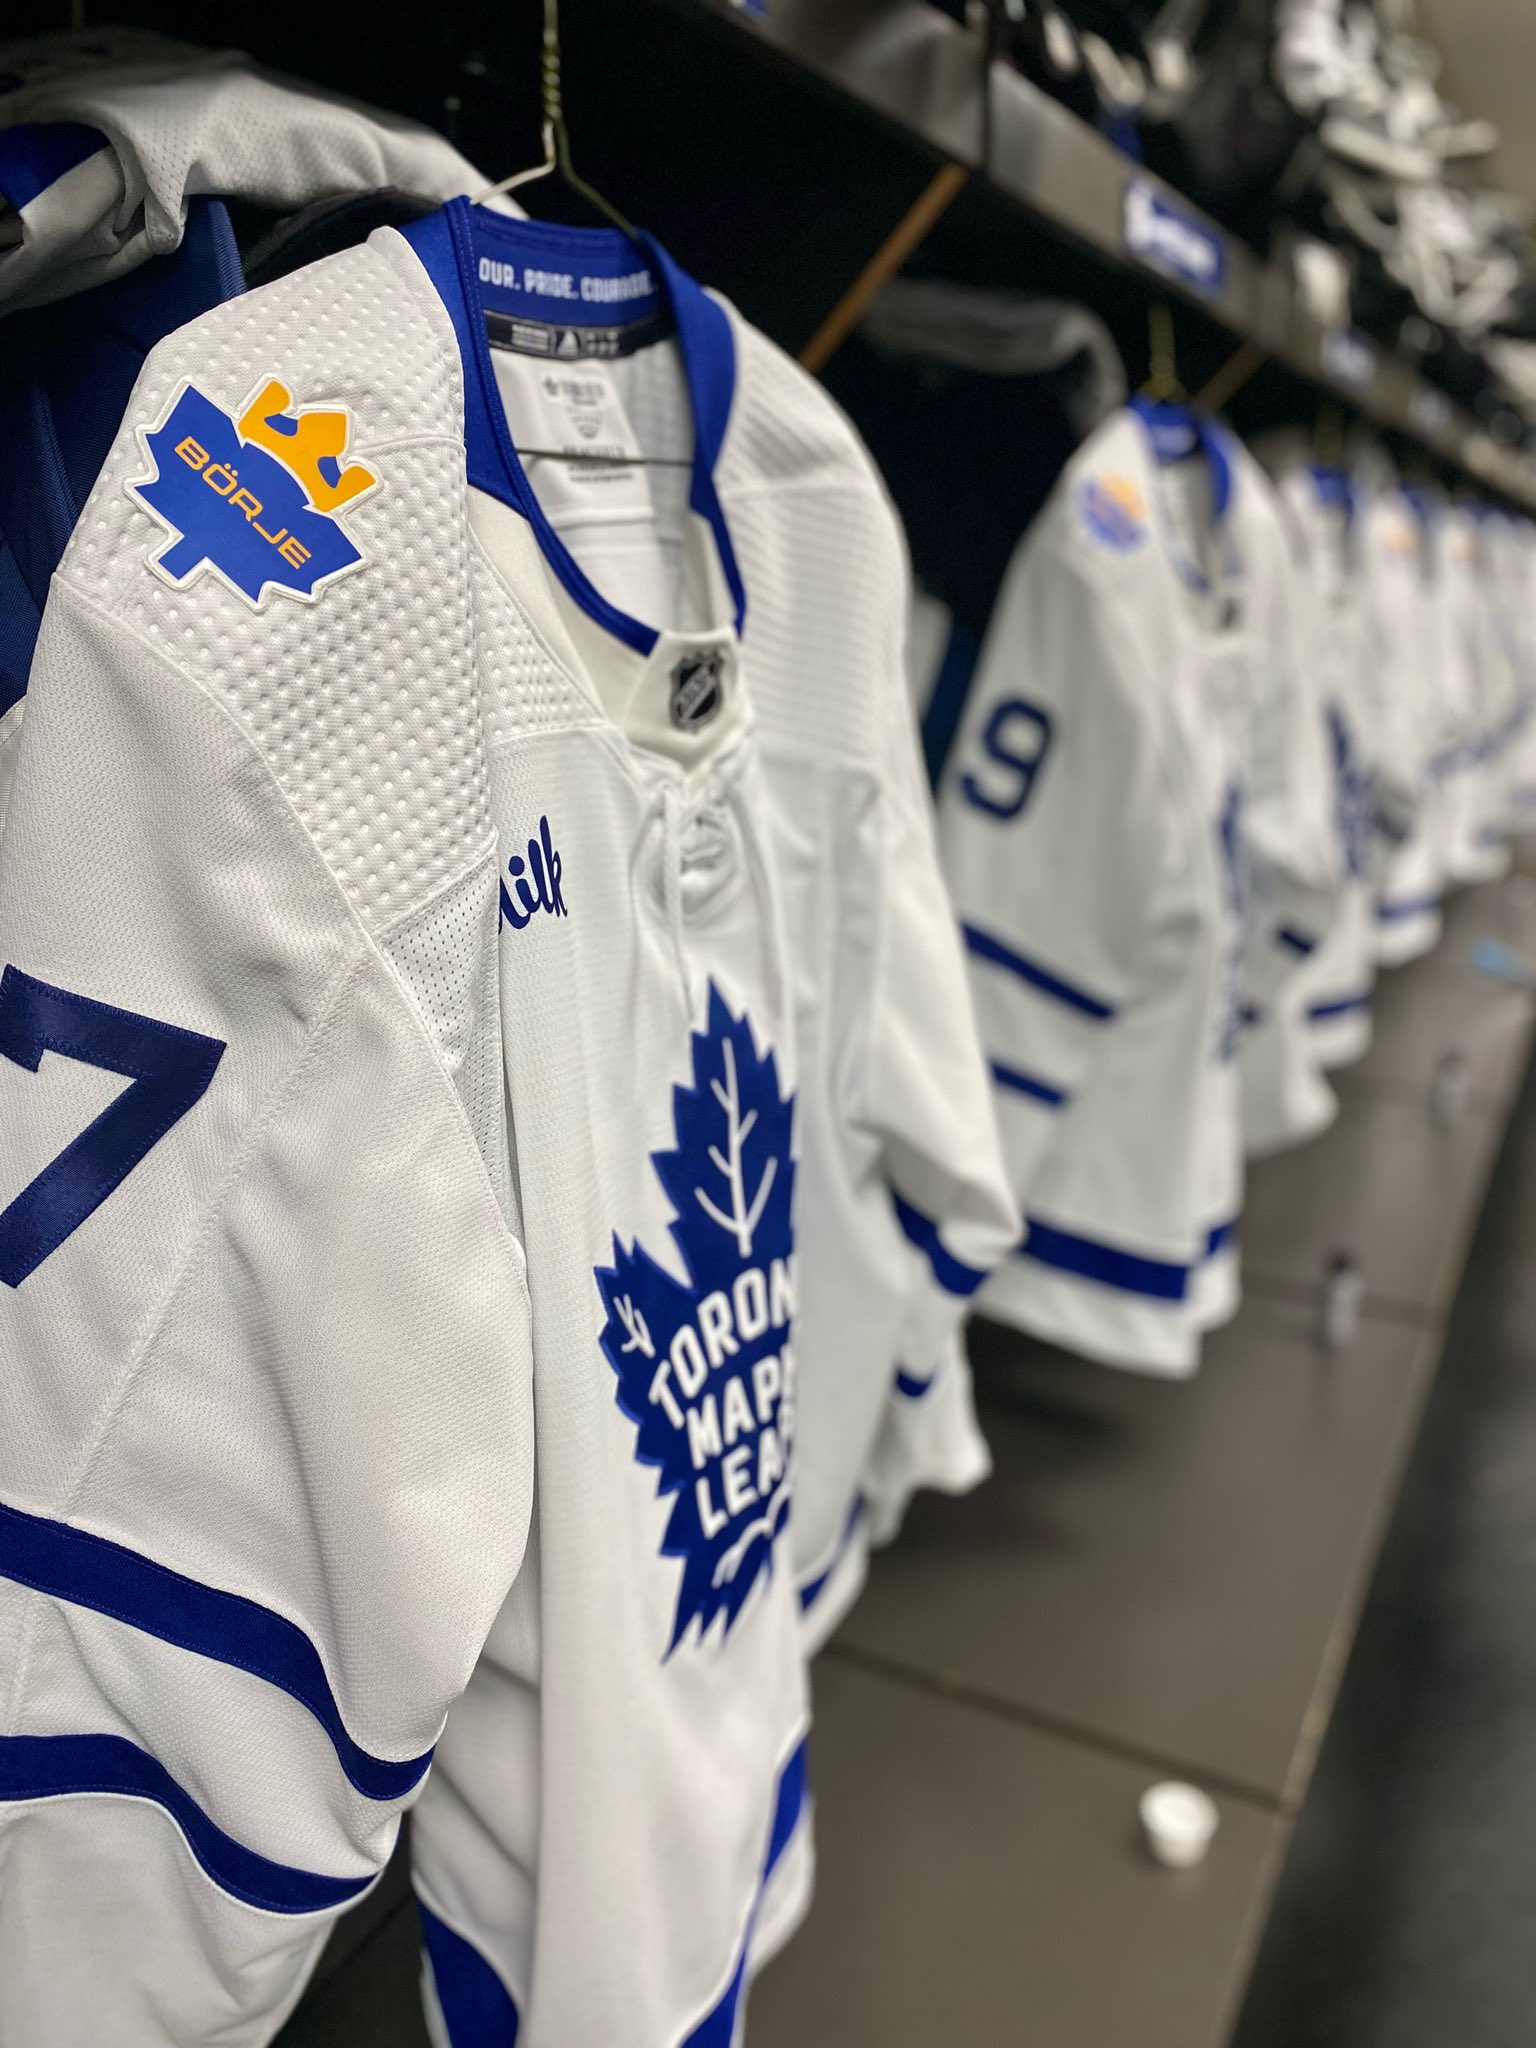 Maple Leafs Hall of Fame jerseys